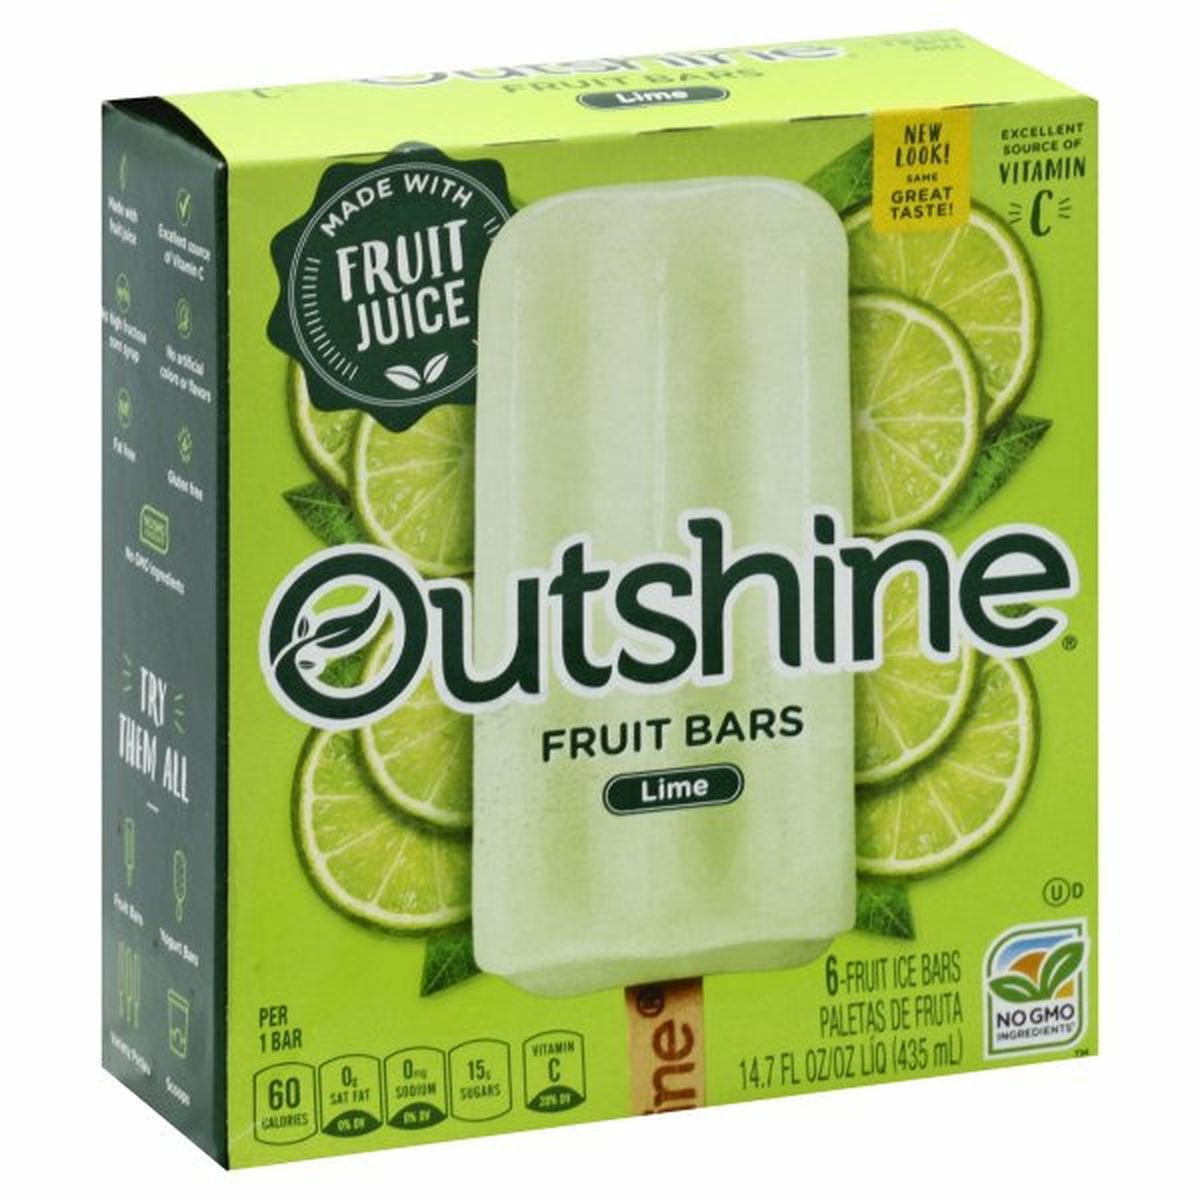 Calories in Outshine Fruit Bars, Lime